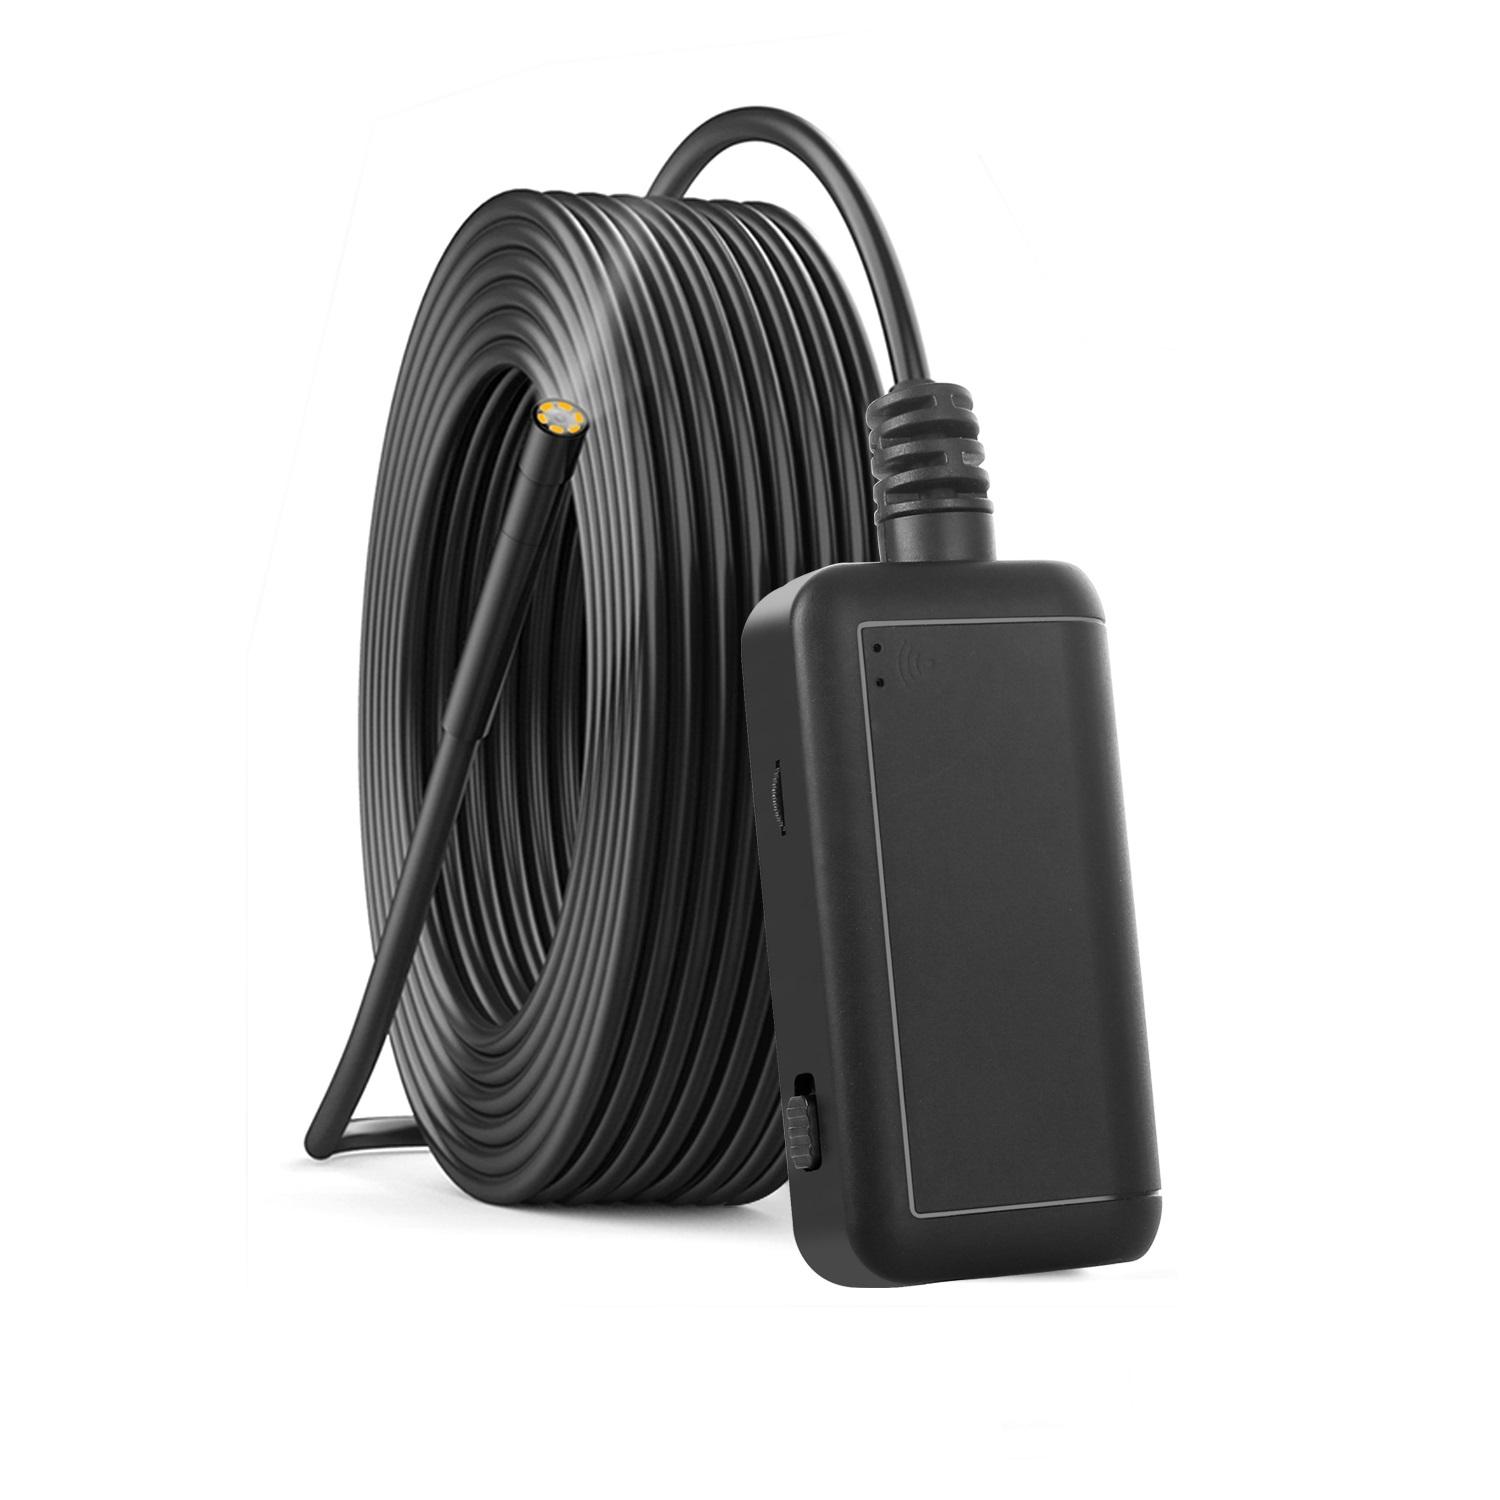 

F220 5.5mm 5 Million Pixels WIFI Borescope Hard Wire Support IOS Android with 6 Adjustable LEDS